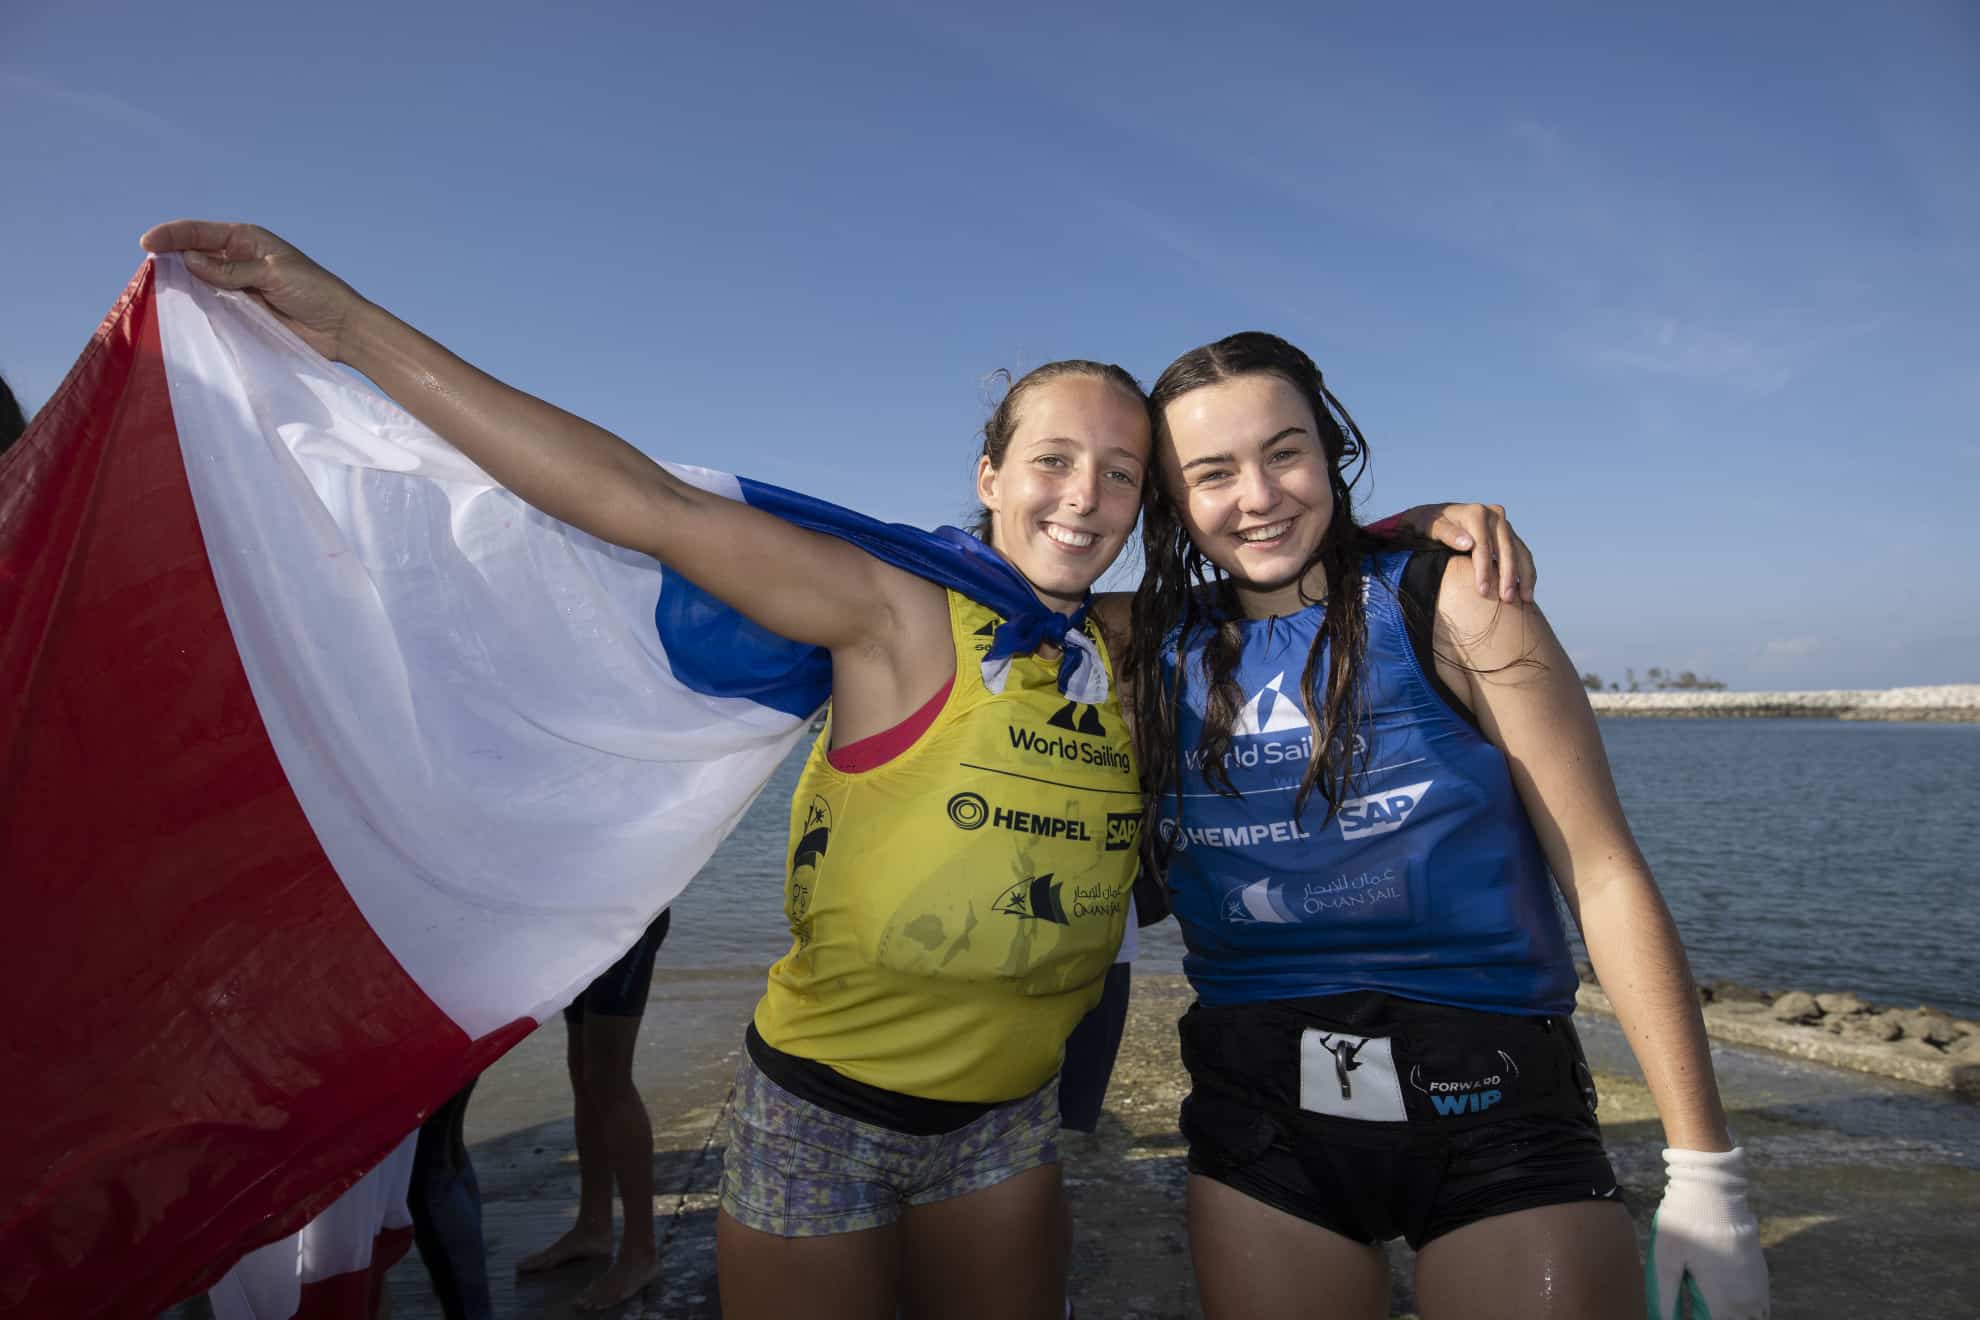 Manon Pianazza remporte les 13 courses Bic 293 world-sailing-youth-sailing-world-championships-2021-llyod-images